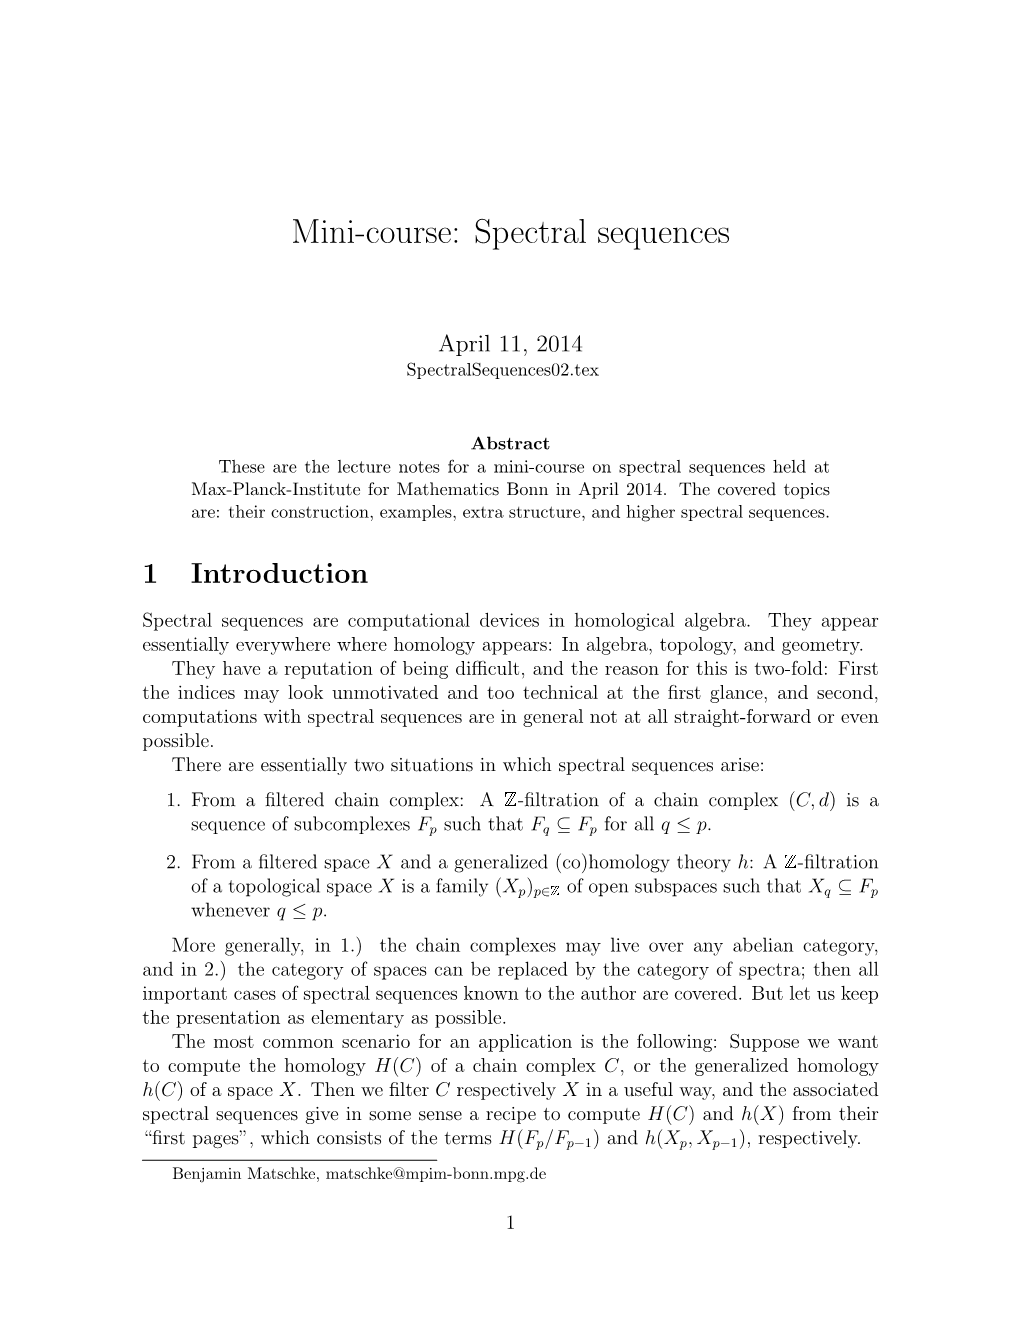 Spectral Sequences